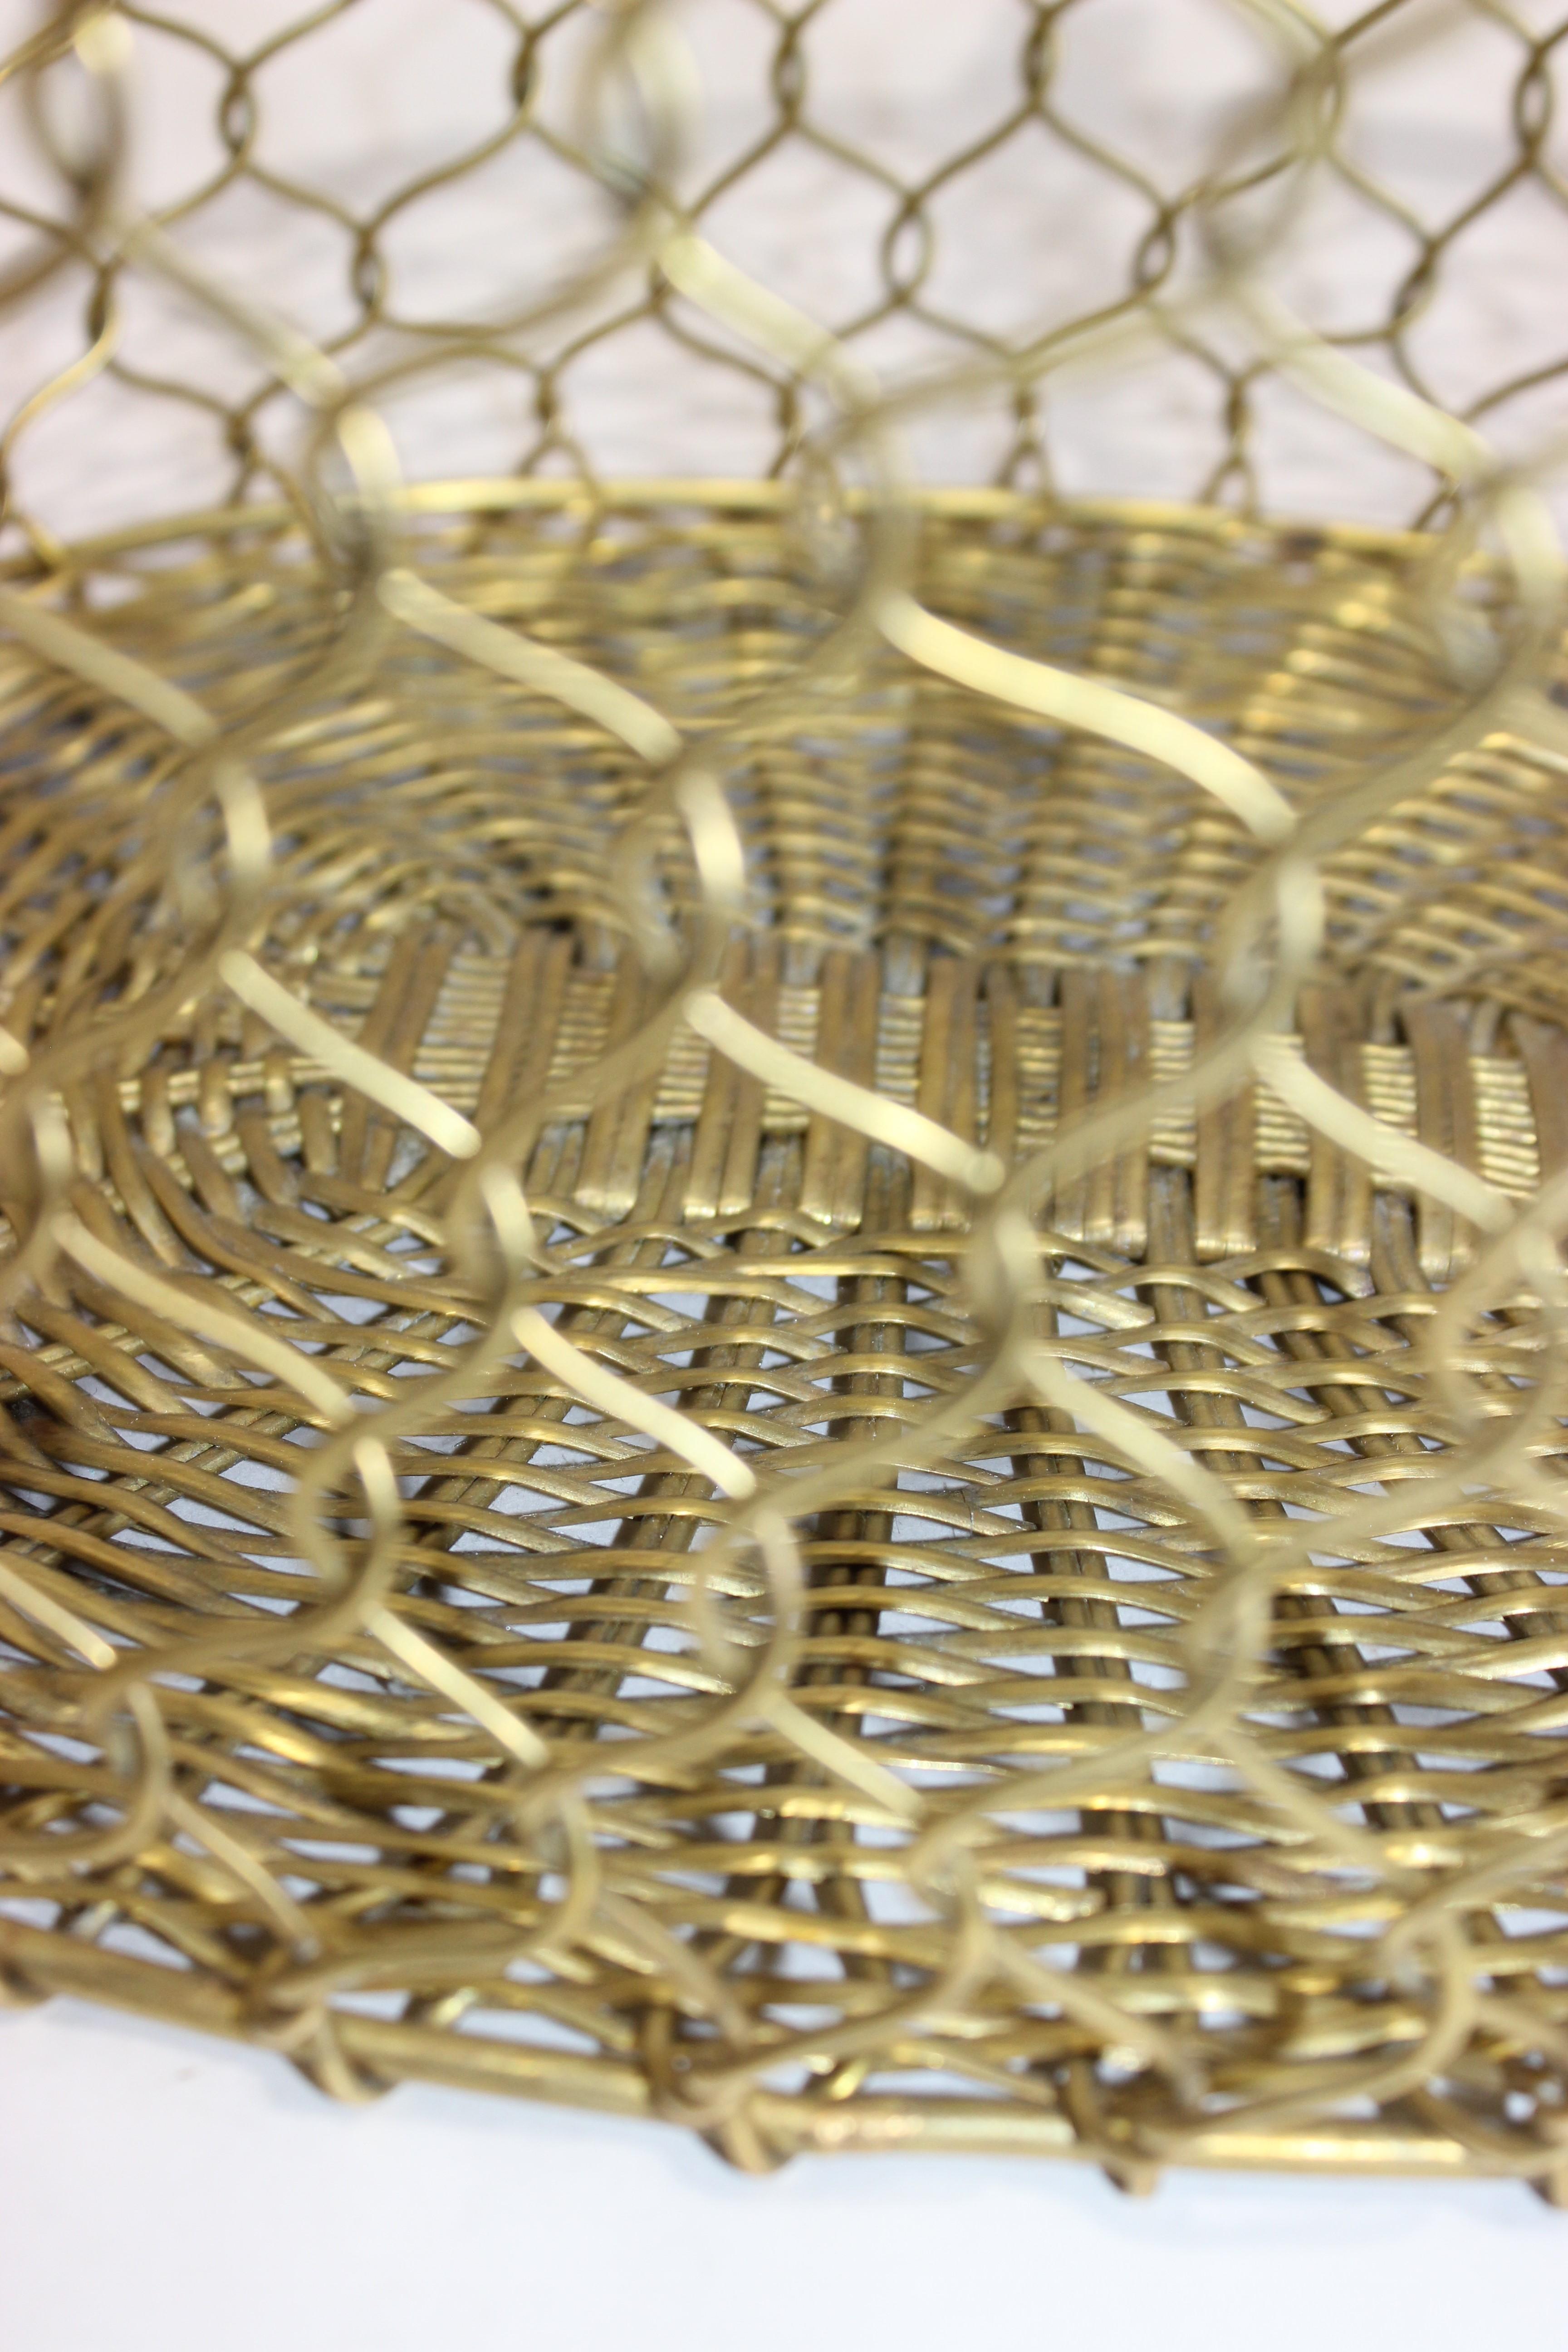 Polished French Country Woven Brass Basket, Mid-20th Century For Sale